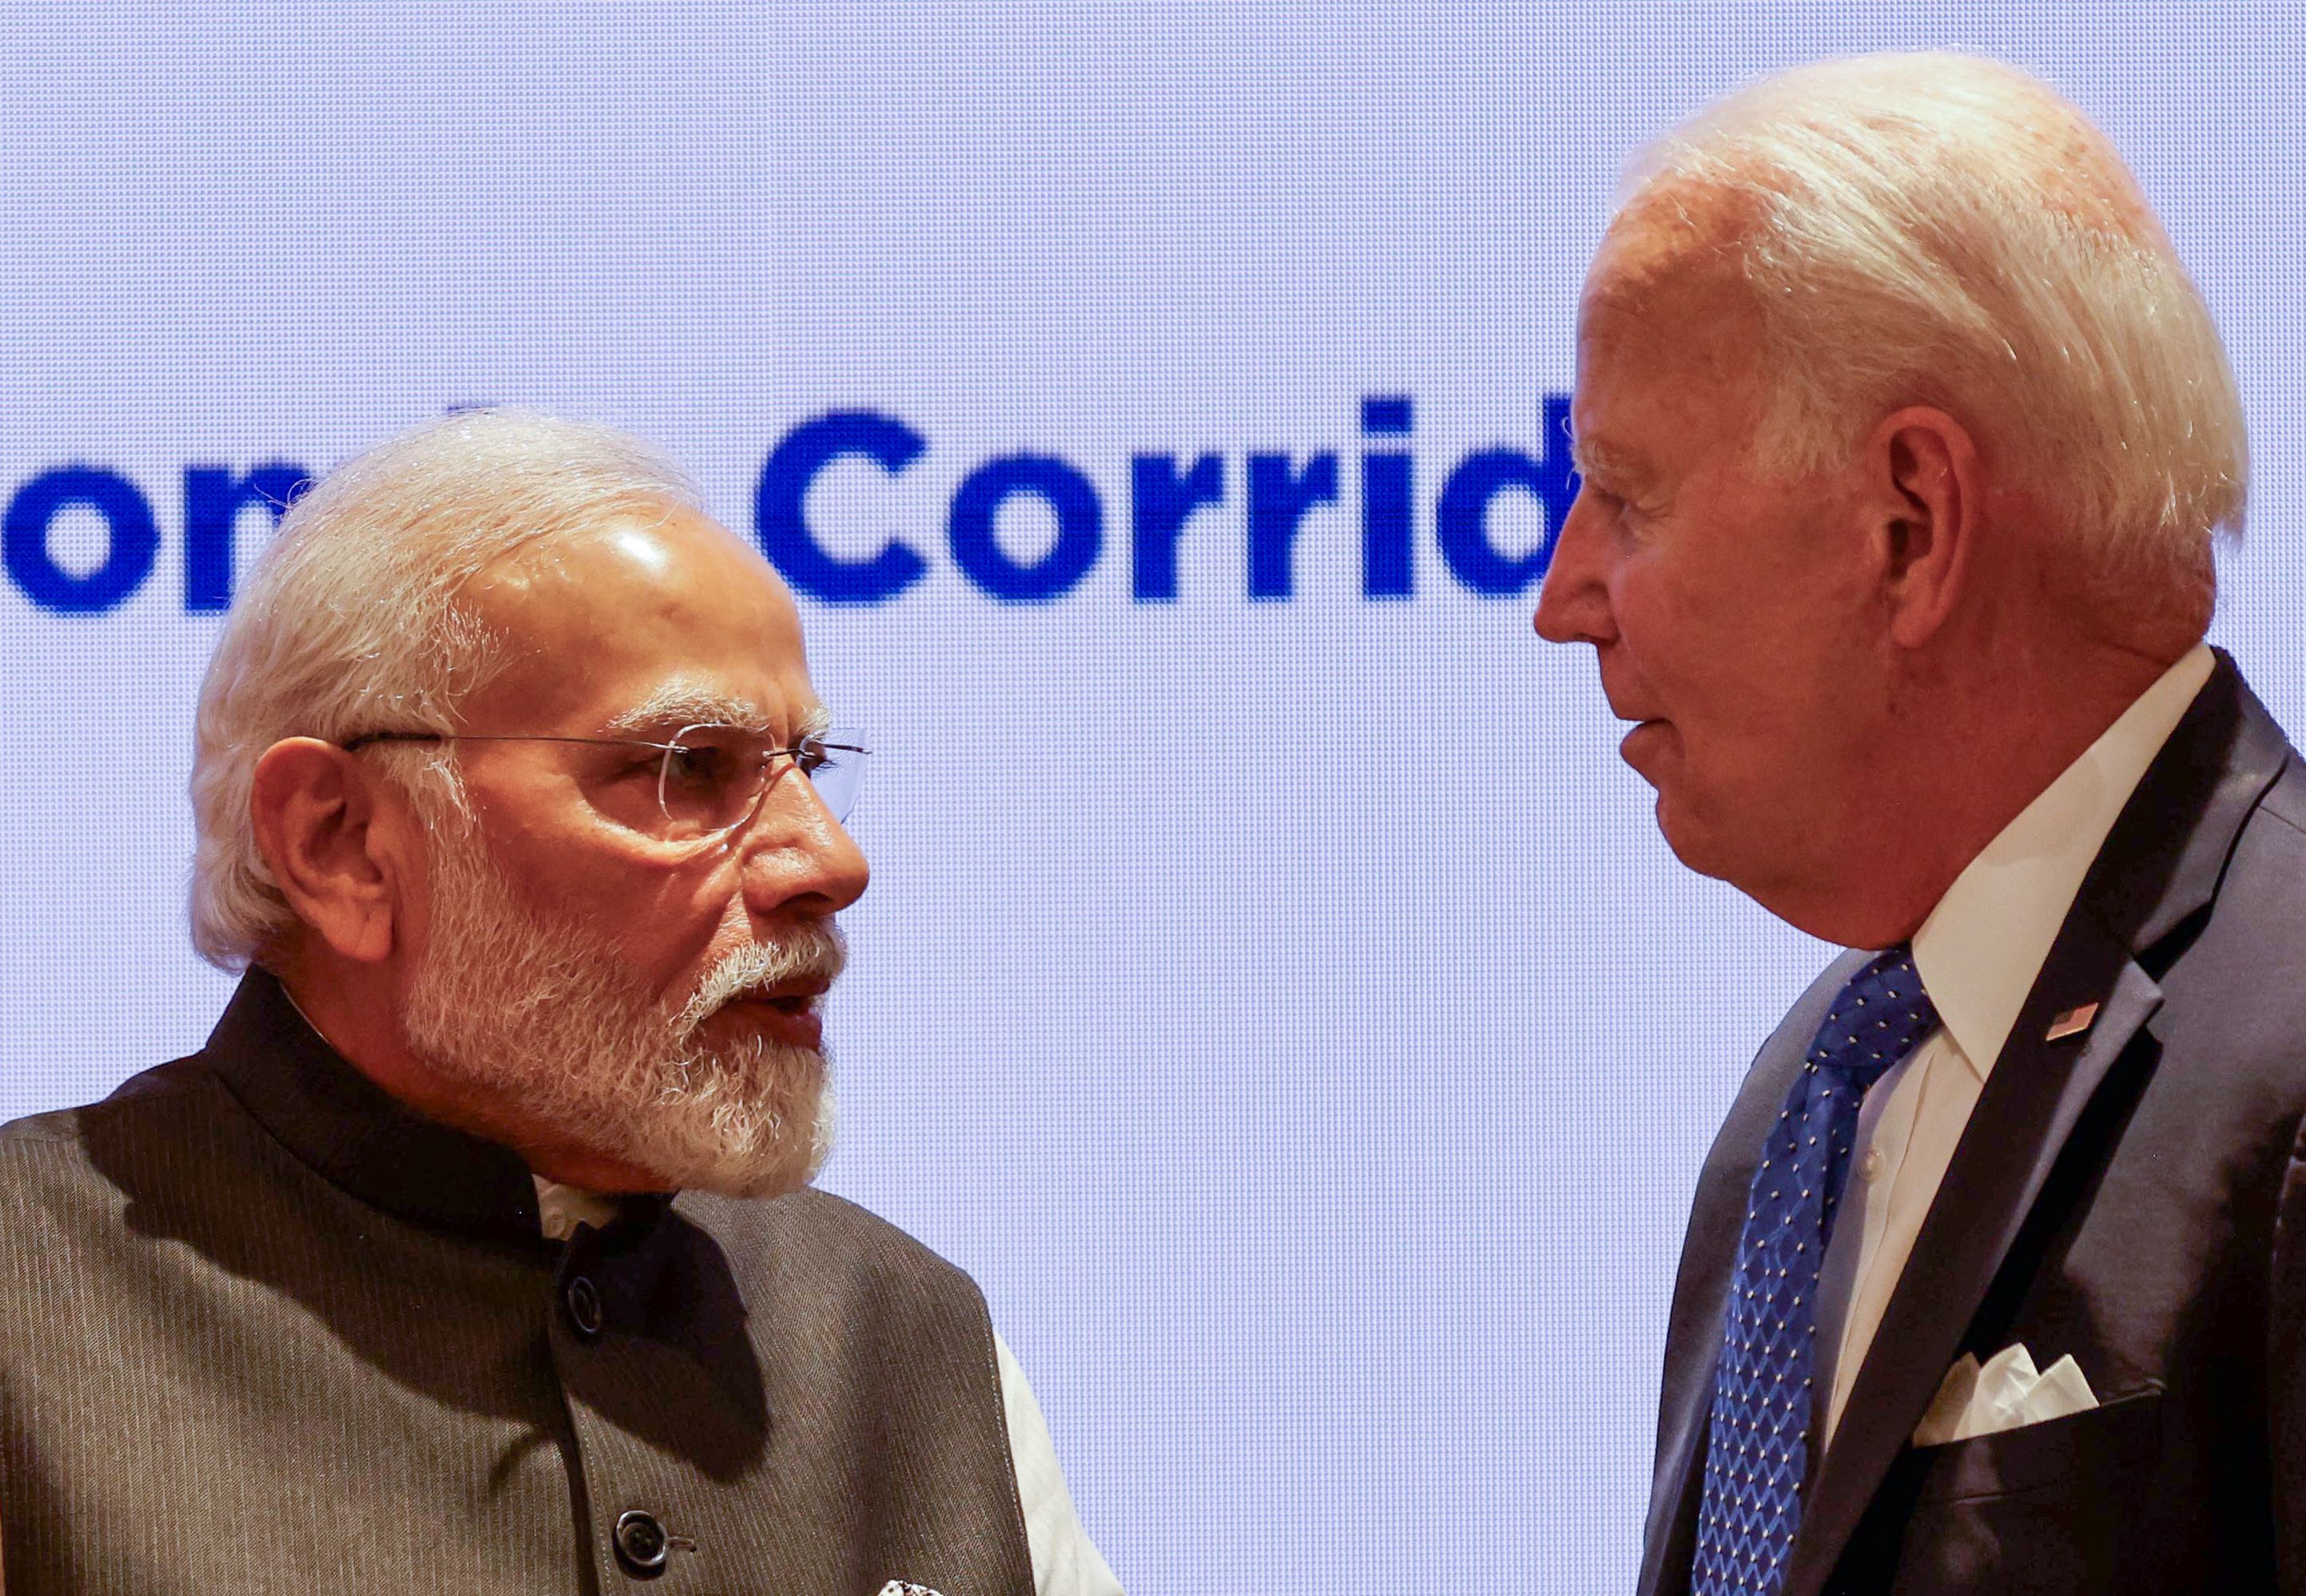 President Joe Biden reportedly also raised the matter directly with Prime Minister Narendra Modi when they met at the Group of 20 Summit in September in New Delhi